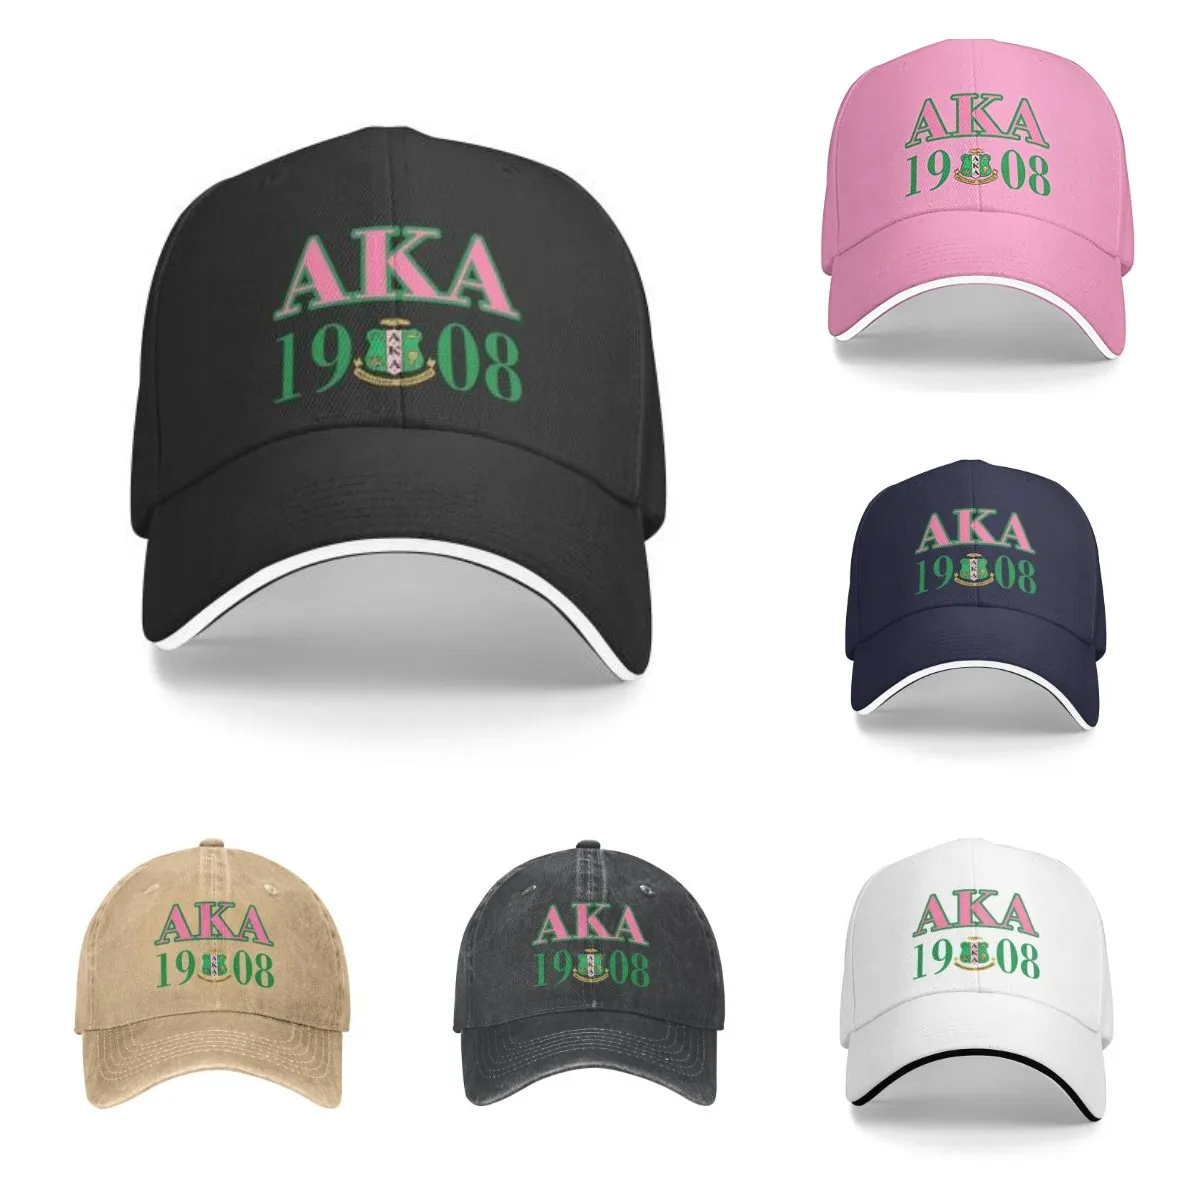 

Pink Aka Baseball Cap Sorority Gifts for Women Classic Adjustable Washed Hat Fits Girls Adult Unisex Four Seasons Casual Men Cap